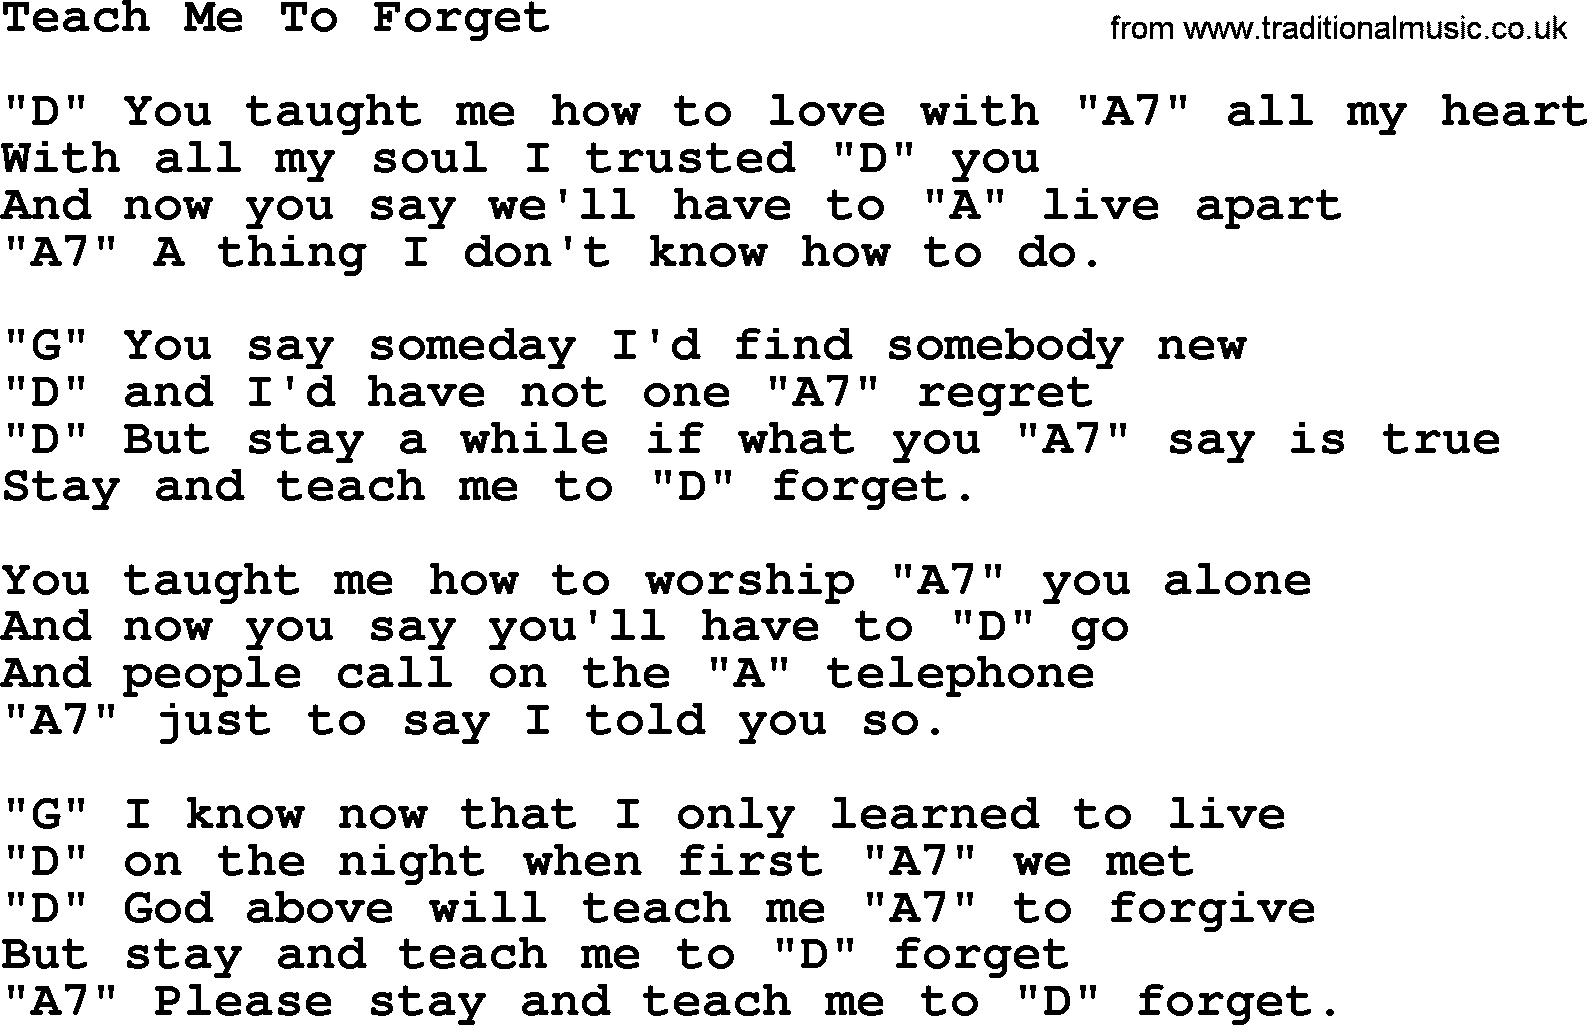 Merle Haggard song: Teach Me To Forget, lyrics and chords